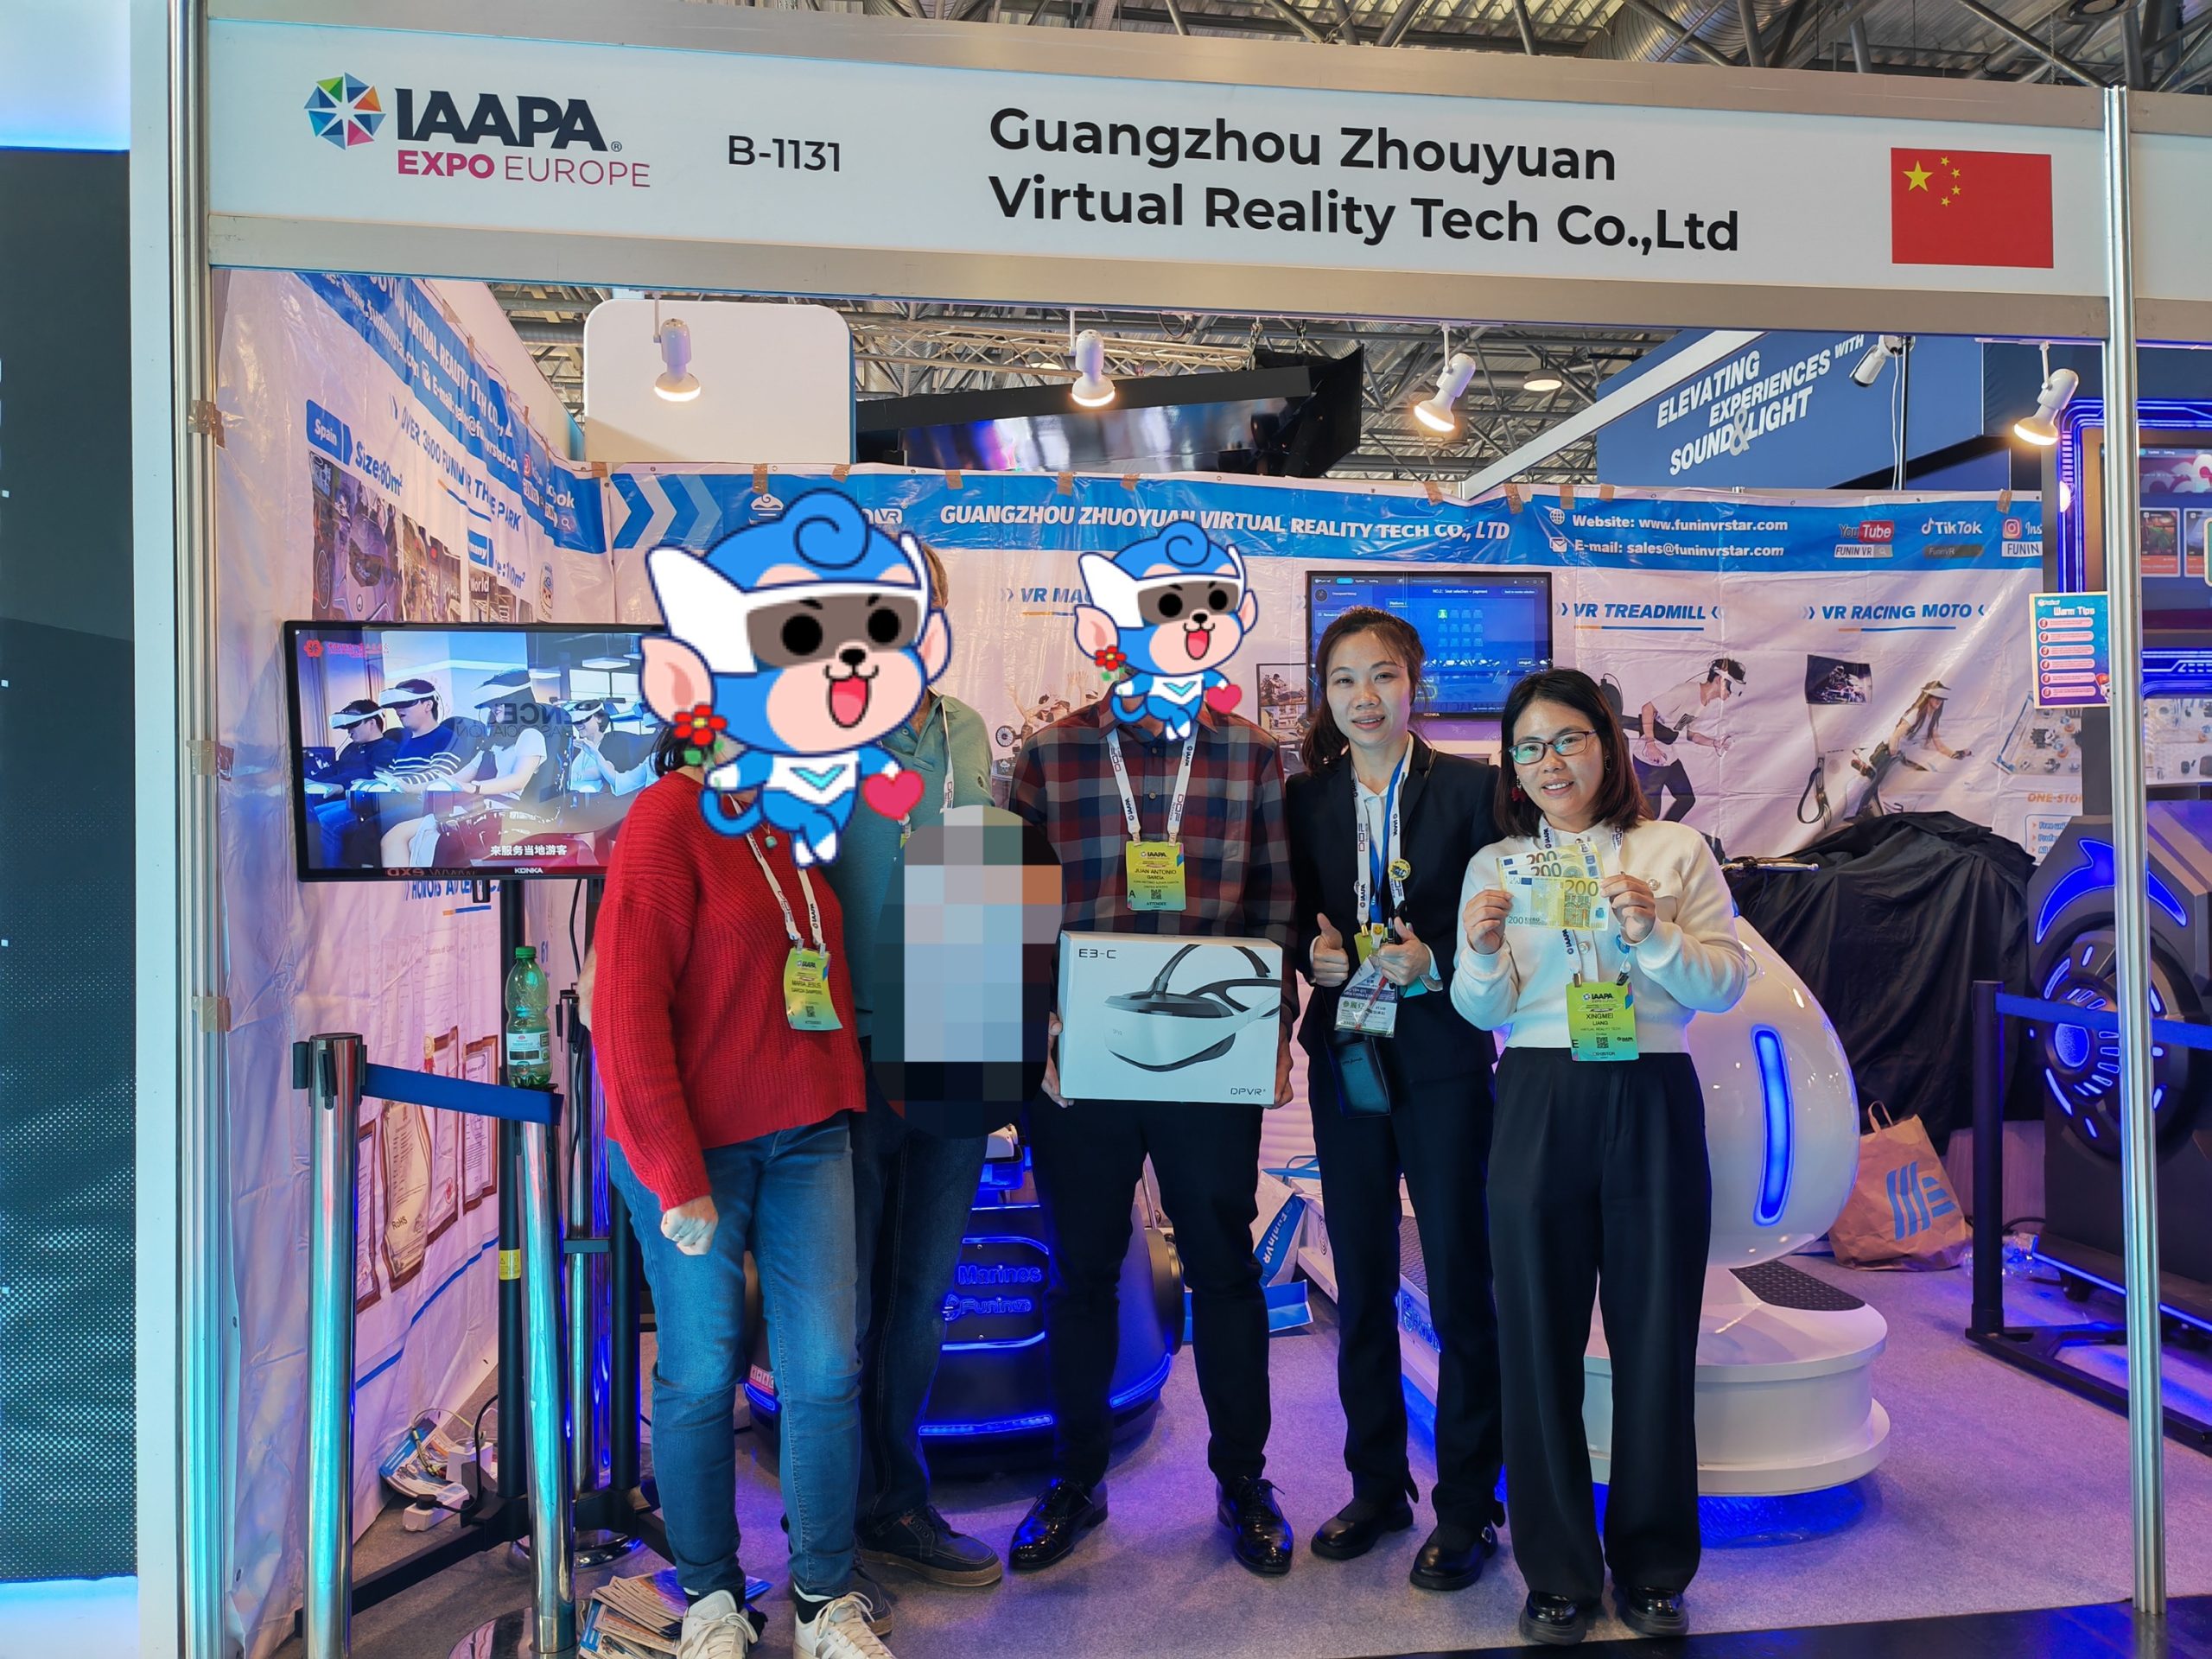 FuninVR Showcased Latest VR Devices at 2023 IAAPA Expo Europe in Austria - Company News - 2